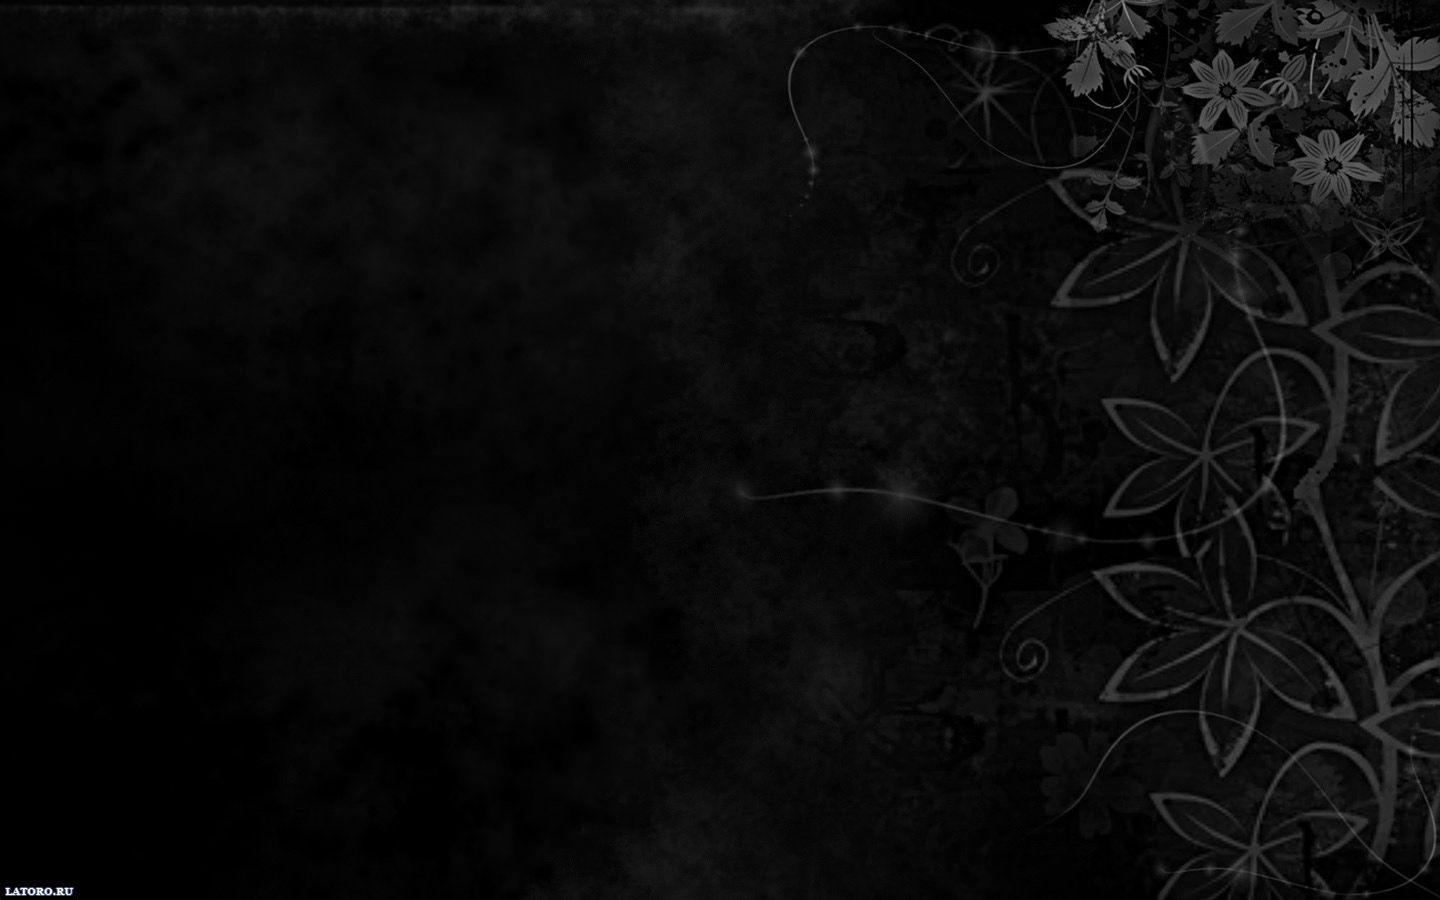 Black and white wallpaper with a pattern of flowers and leaves - Dark, black, 1440x900